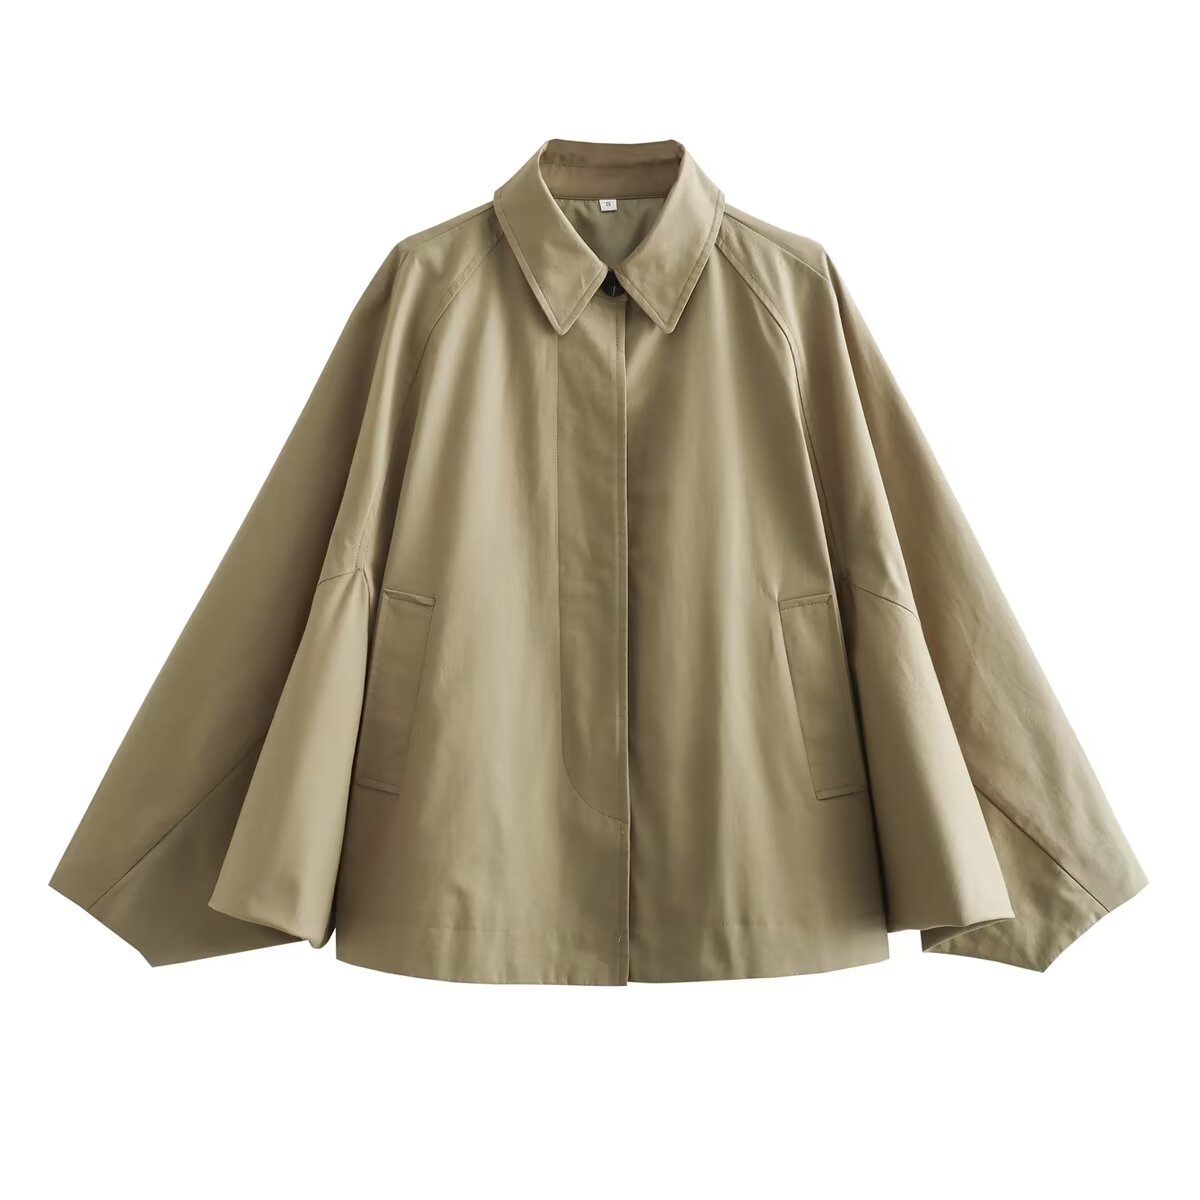 Women French Collared Casual Cape Short Trench Coat